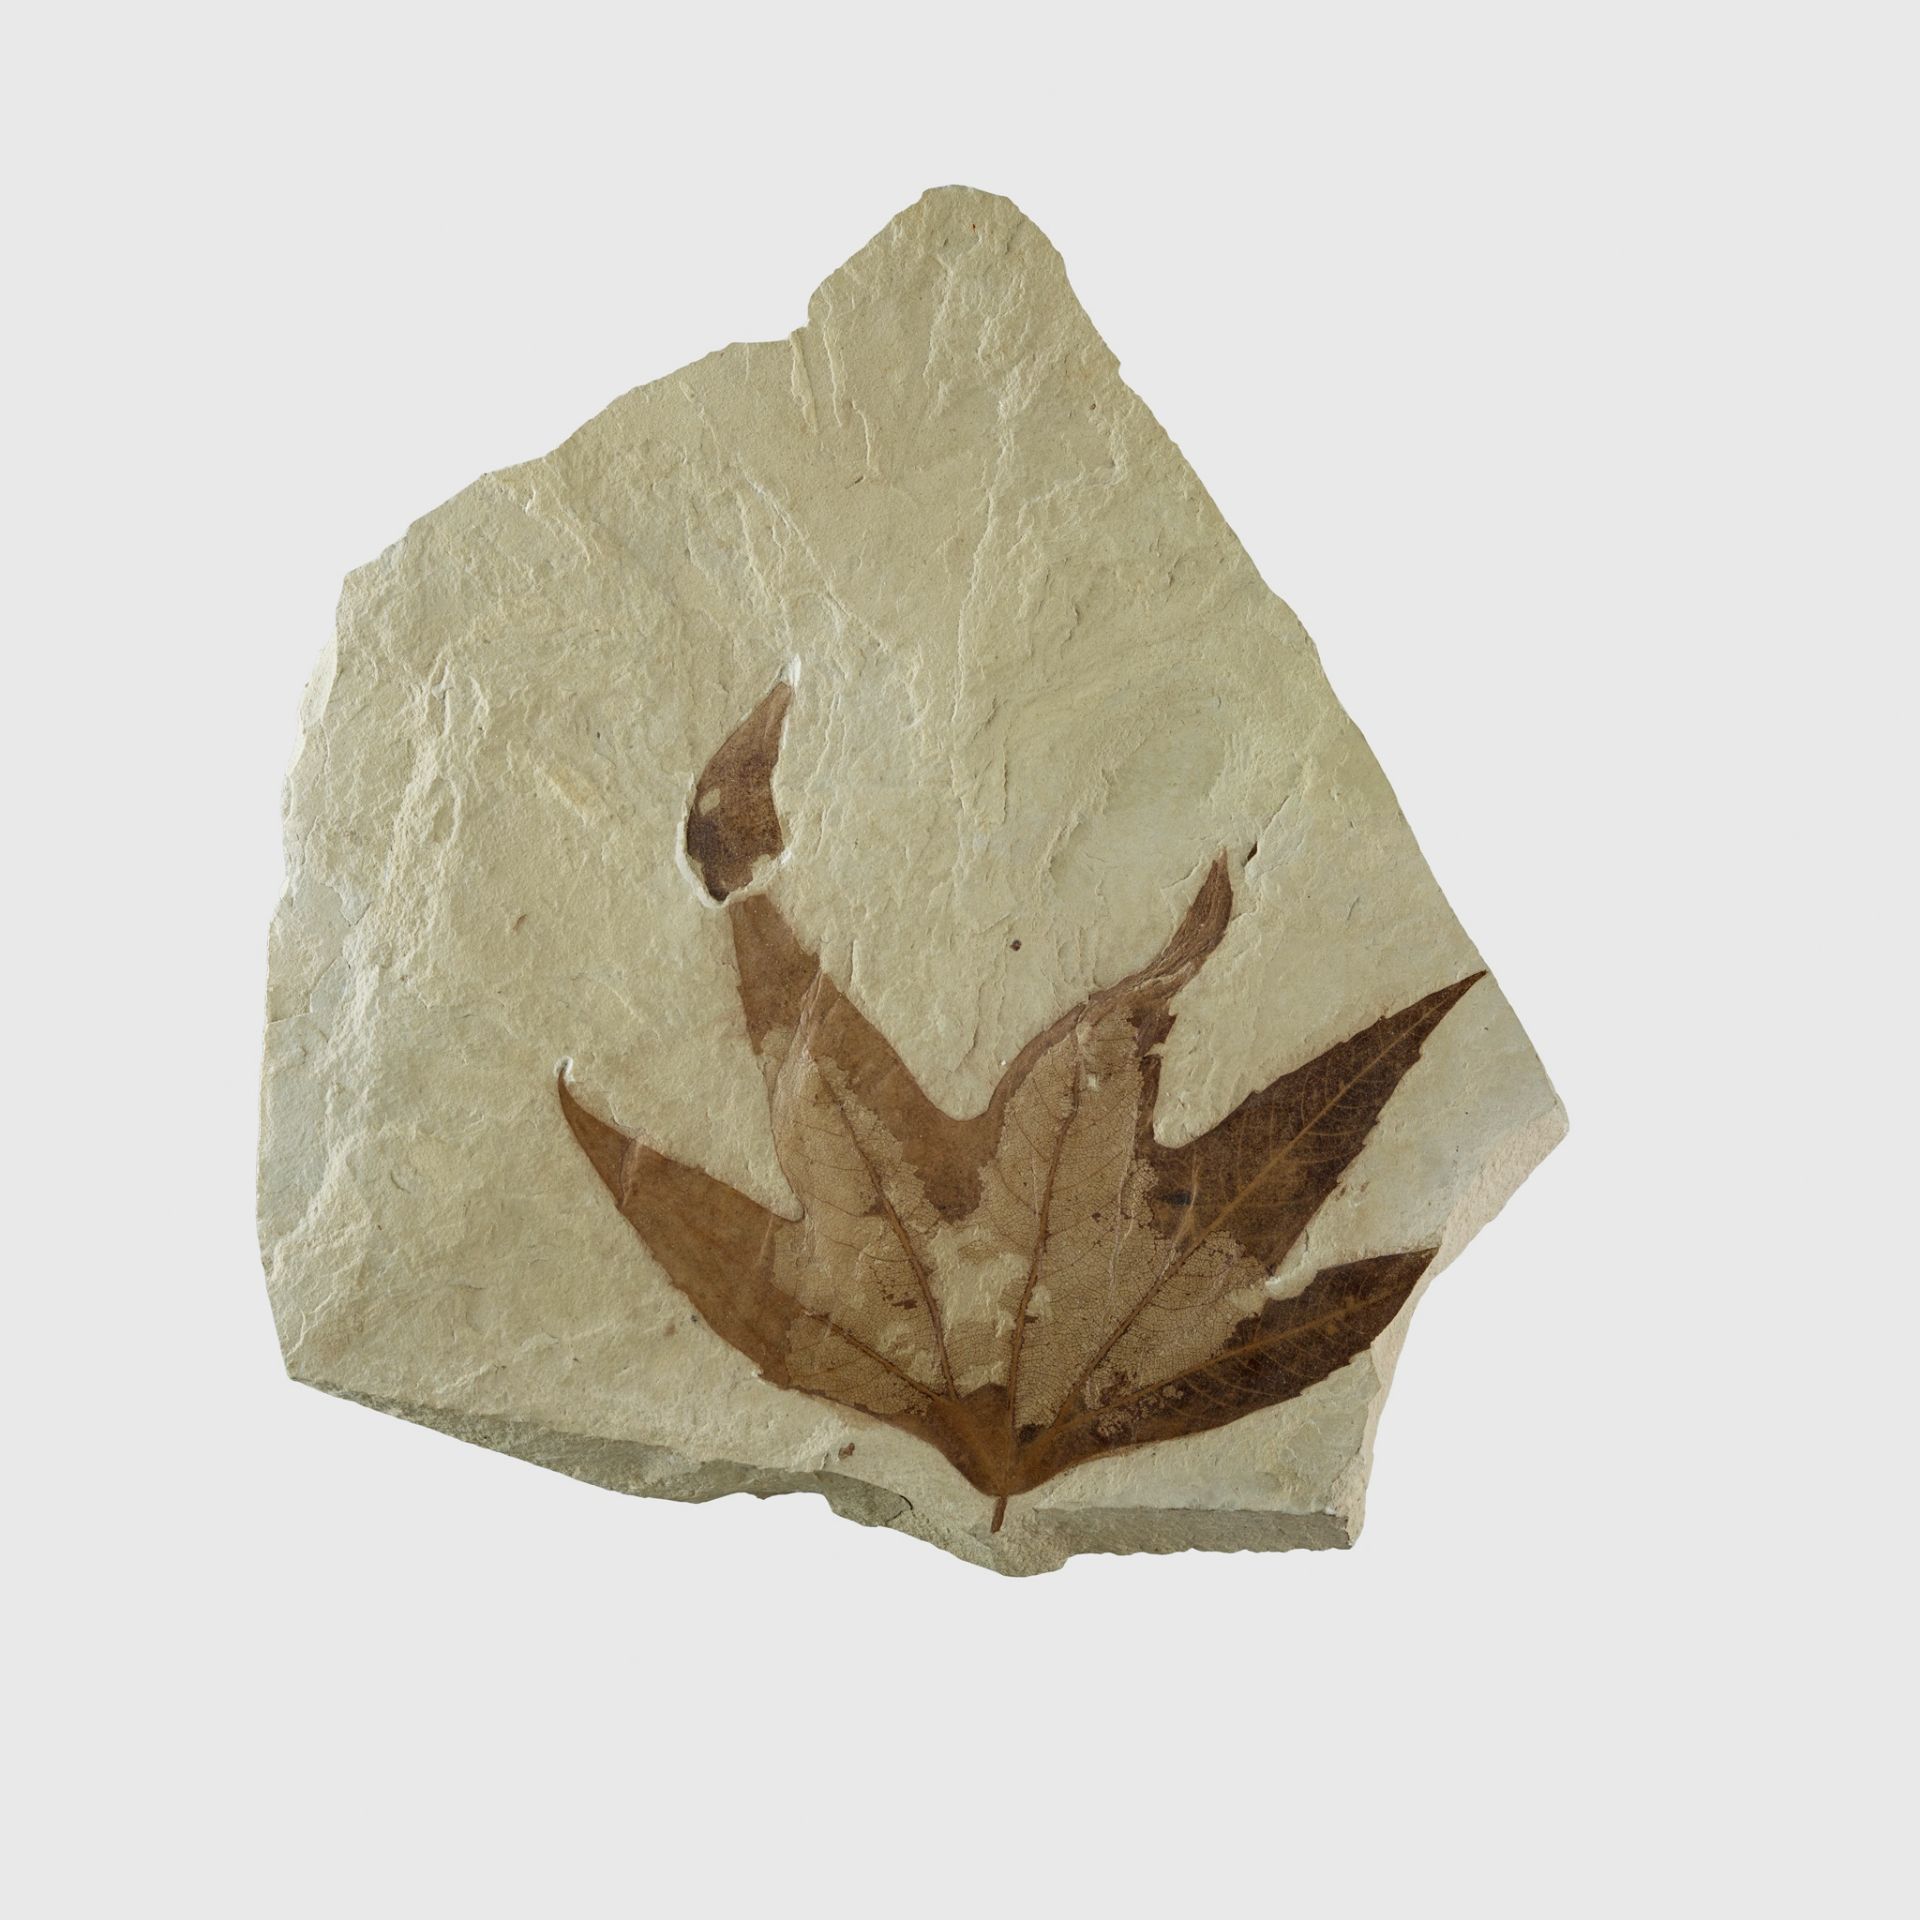 FOSSIL SYCAMORE LEAF GREEN RIVER, WYOMING, EOCENE PERIOD, 50 MILLION YEARS BP